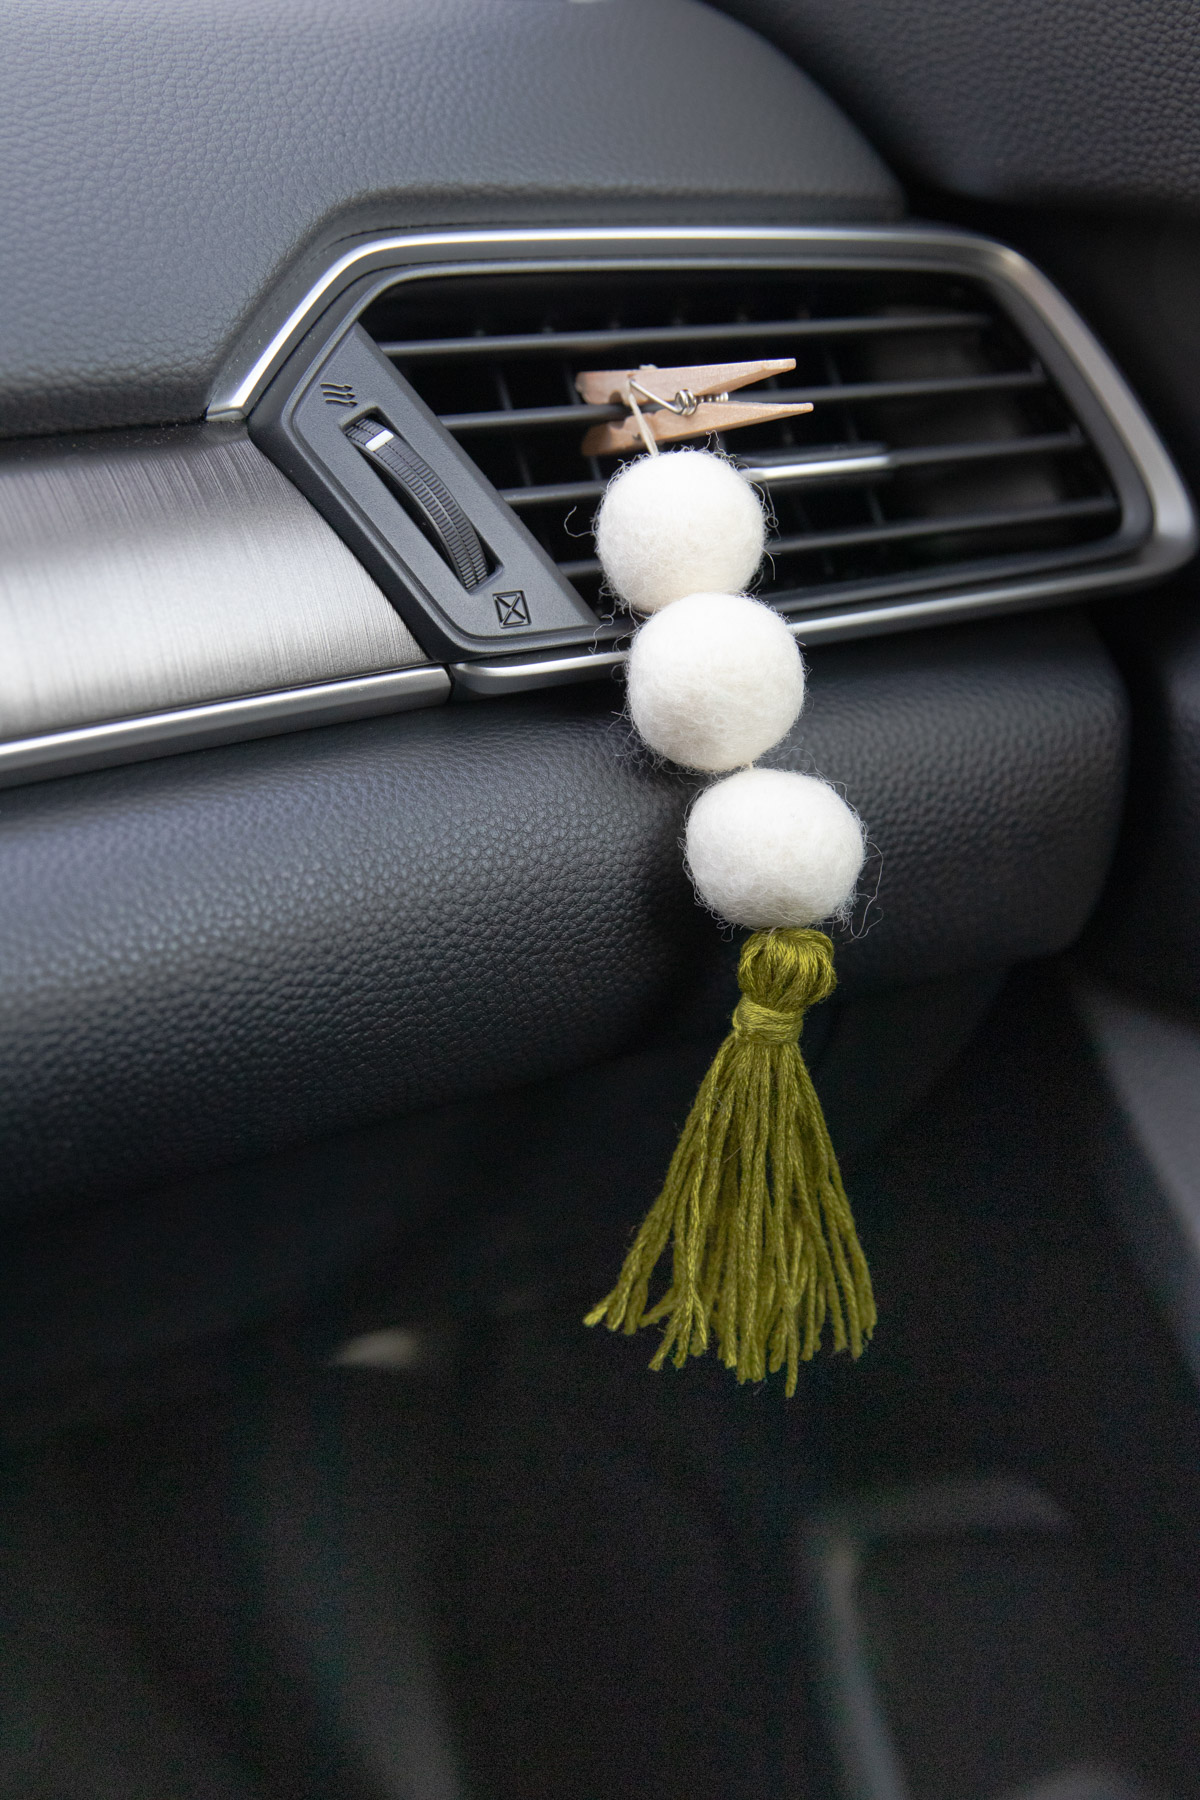 These DIY car air fresheners use herbs, botanicals and essential oils to give your car a fresh, sunny scent, naturally.